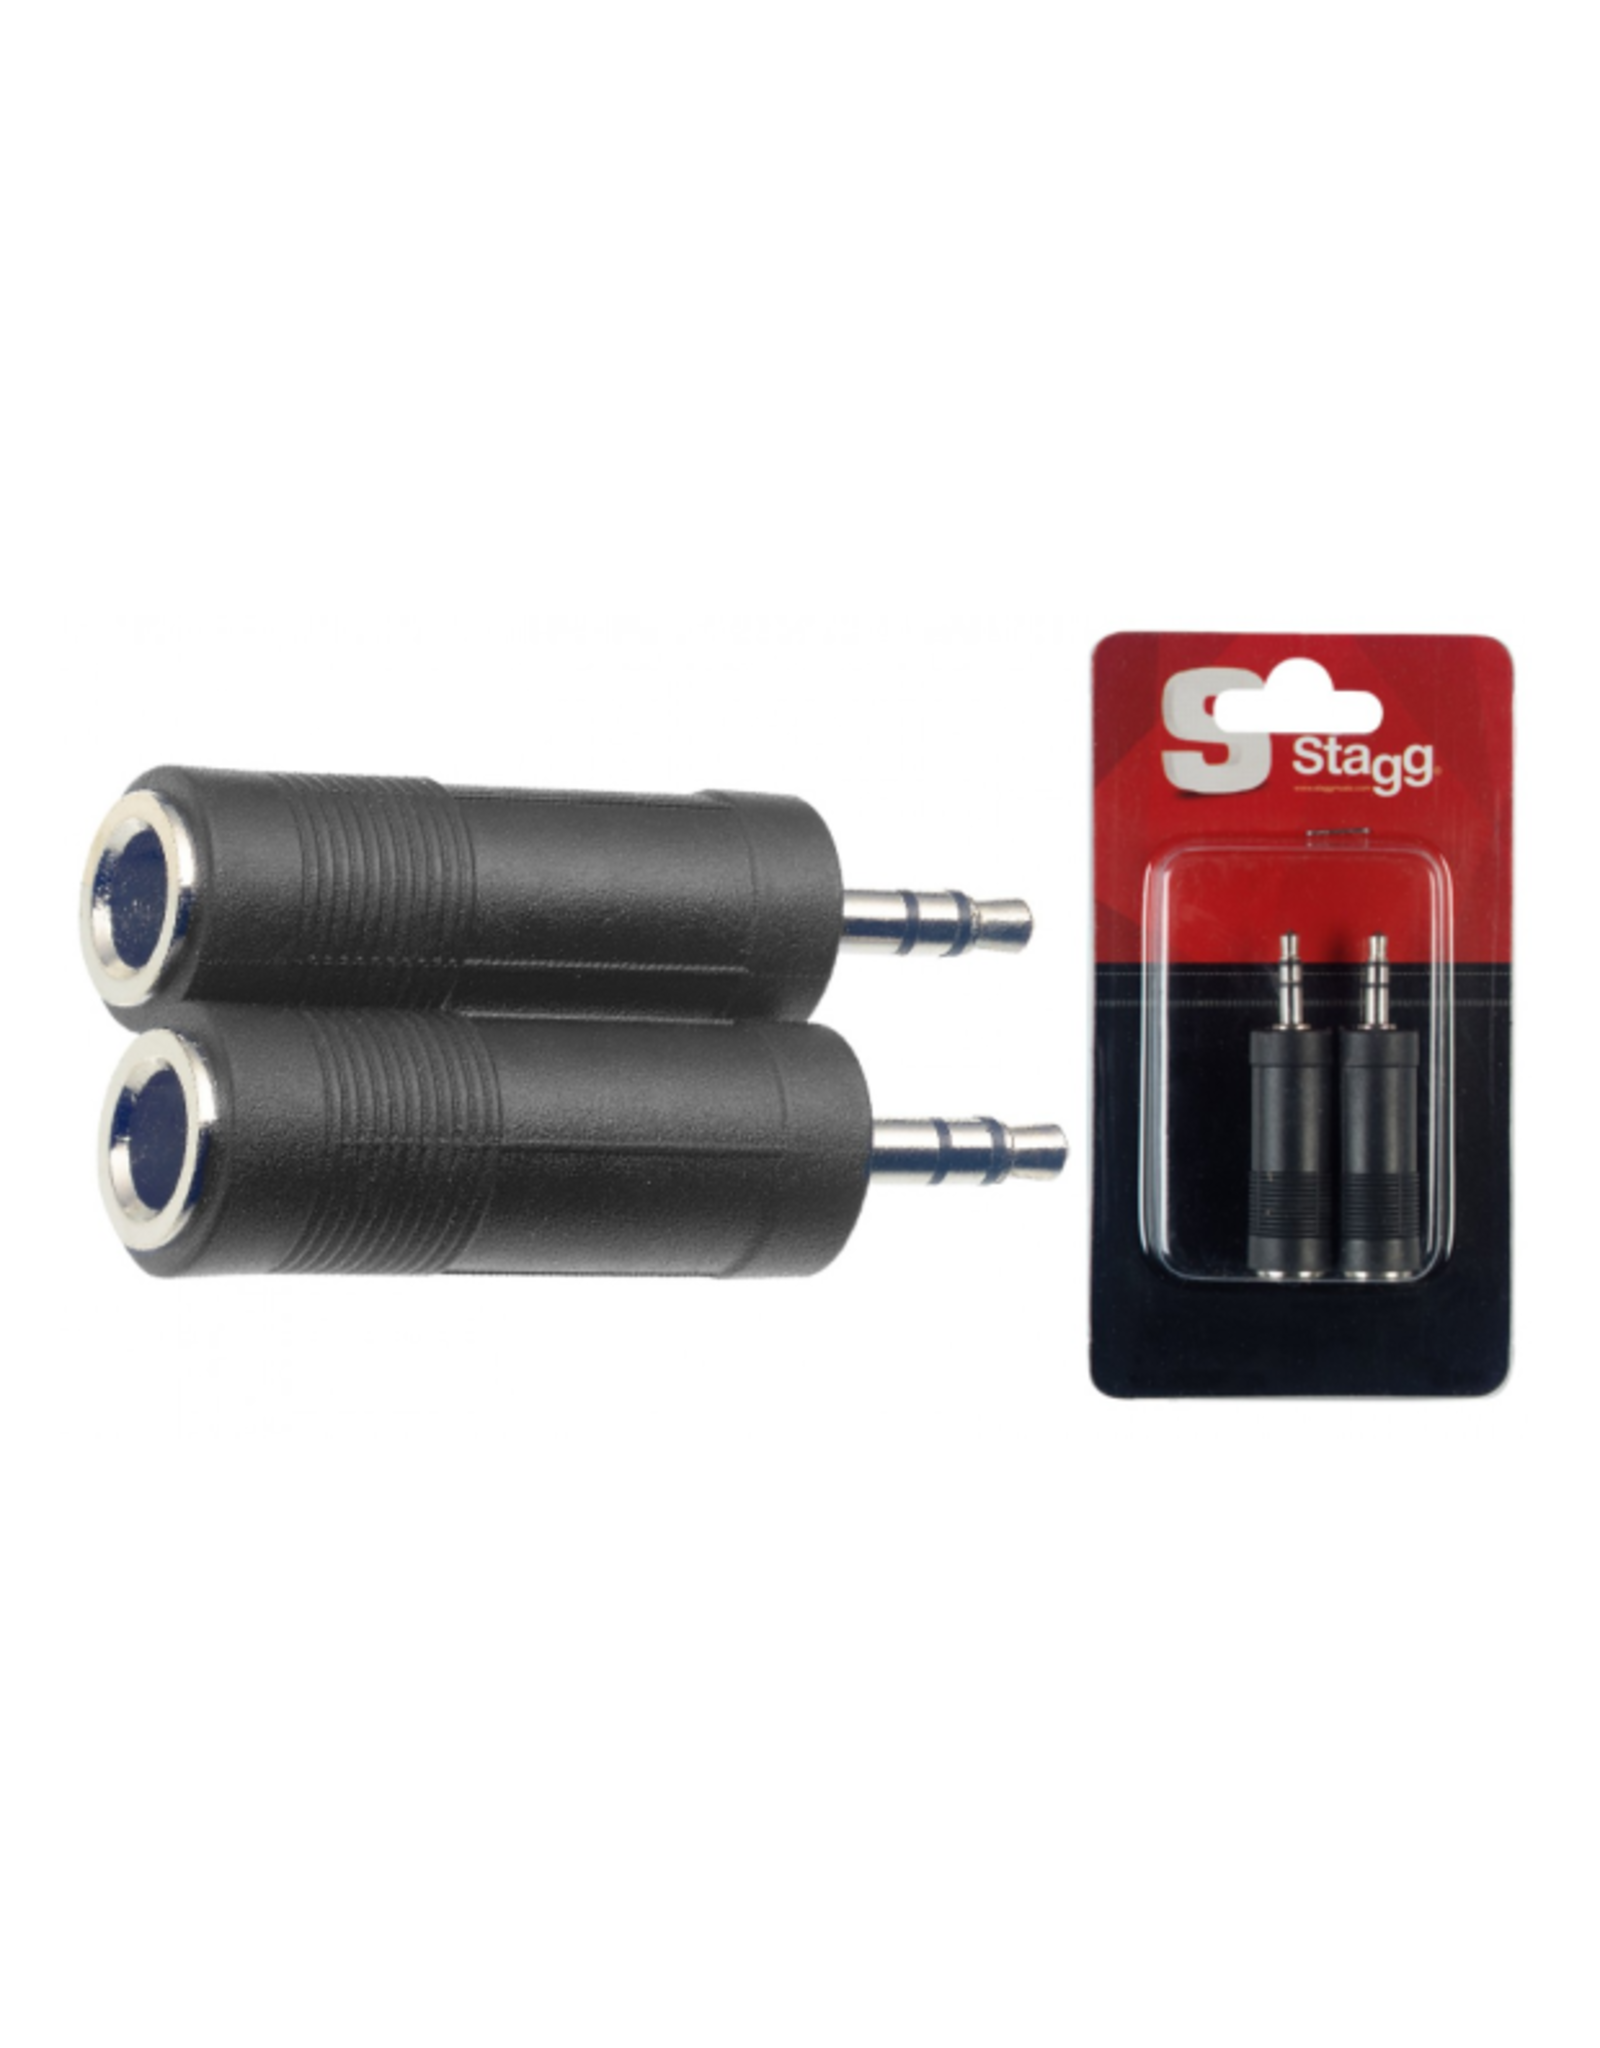 Stagg Stagg Female Stereo Jack/Male Stereo Mini Phone-Plug Adaptor 2 Pack